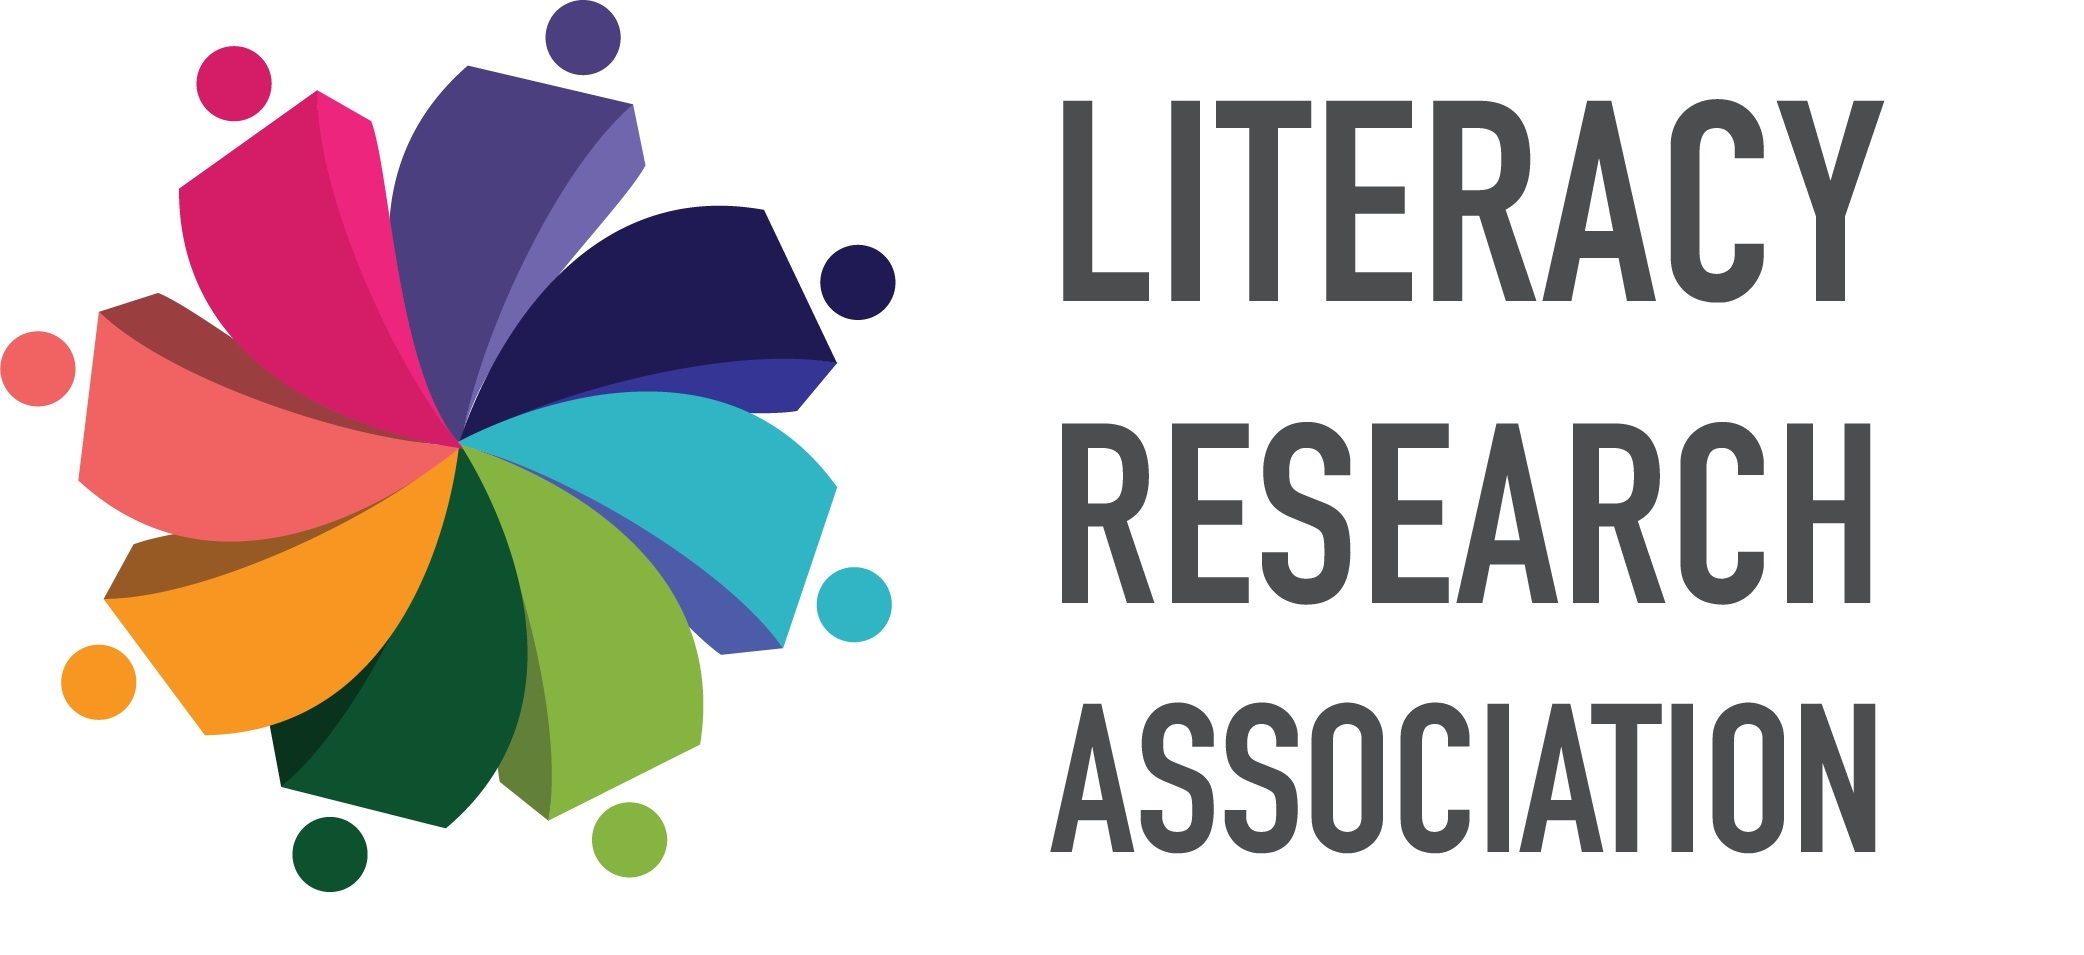 Literacy Research Association Pursues Equity With 2022 Conference Theme